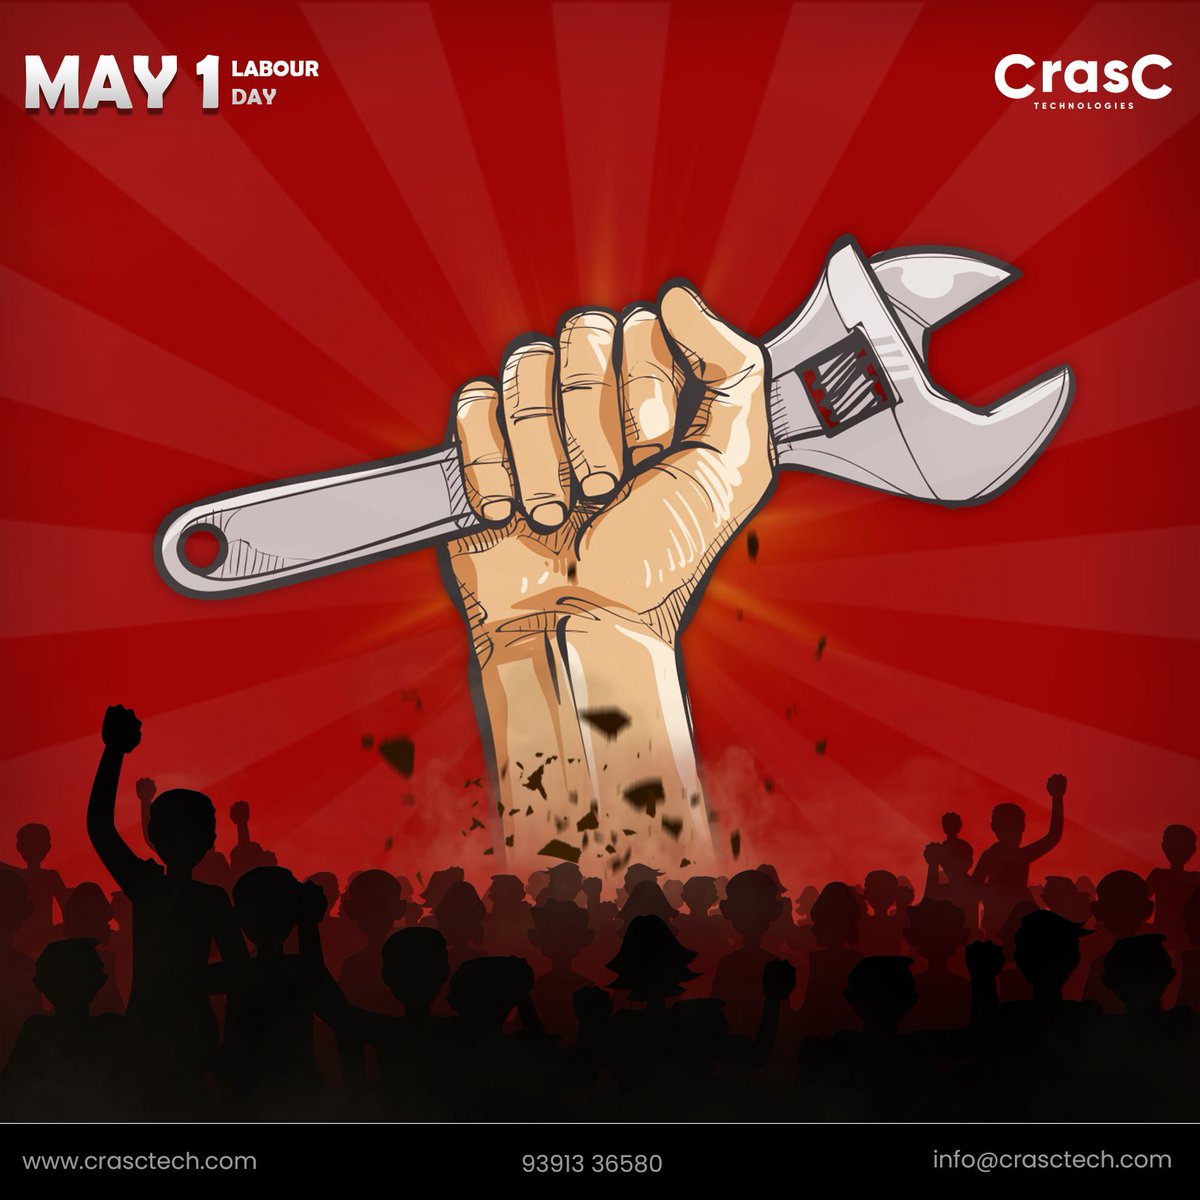 🛠️🎊 On this Labour Day, Crasctech honors the resilience and strength of the workforce around the world. Here's to the men and women who build, create, and inspire! 🙌🌟 #crasctech #digitalmarketing #socialmediamarketing #MayDay #MayDay2024 #LabourDay2024 #HardWorkMatters